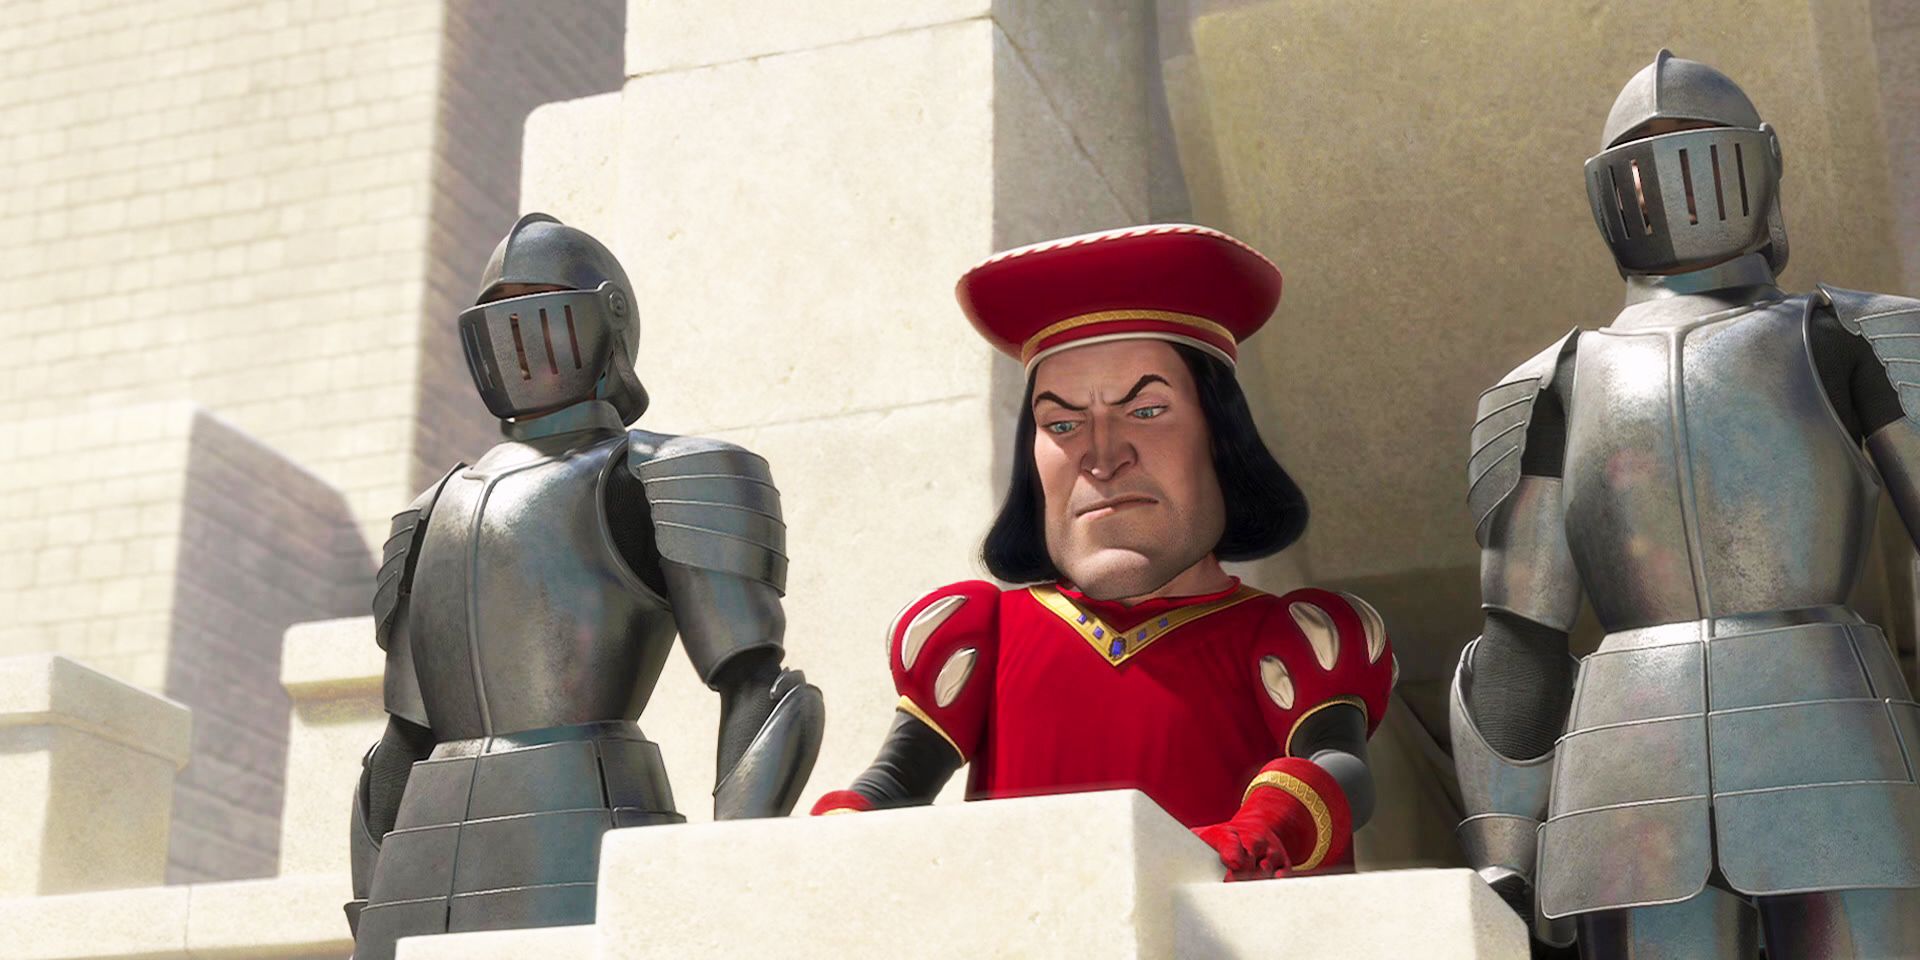 Why Did Lord Farquaad Hate Fairy Tale Creatures In Shrek?